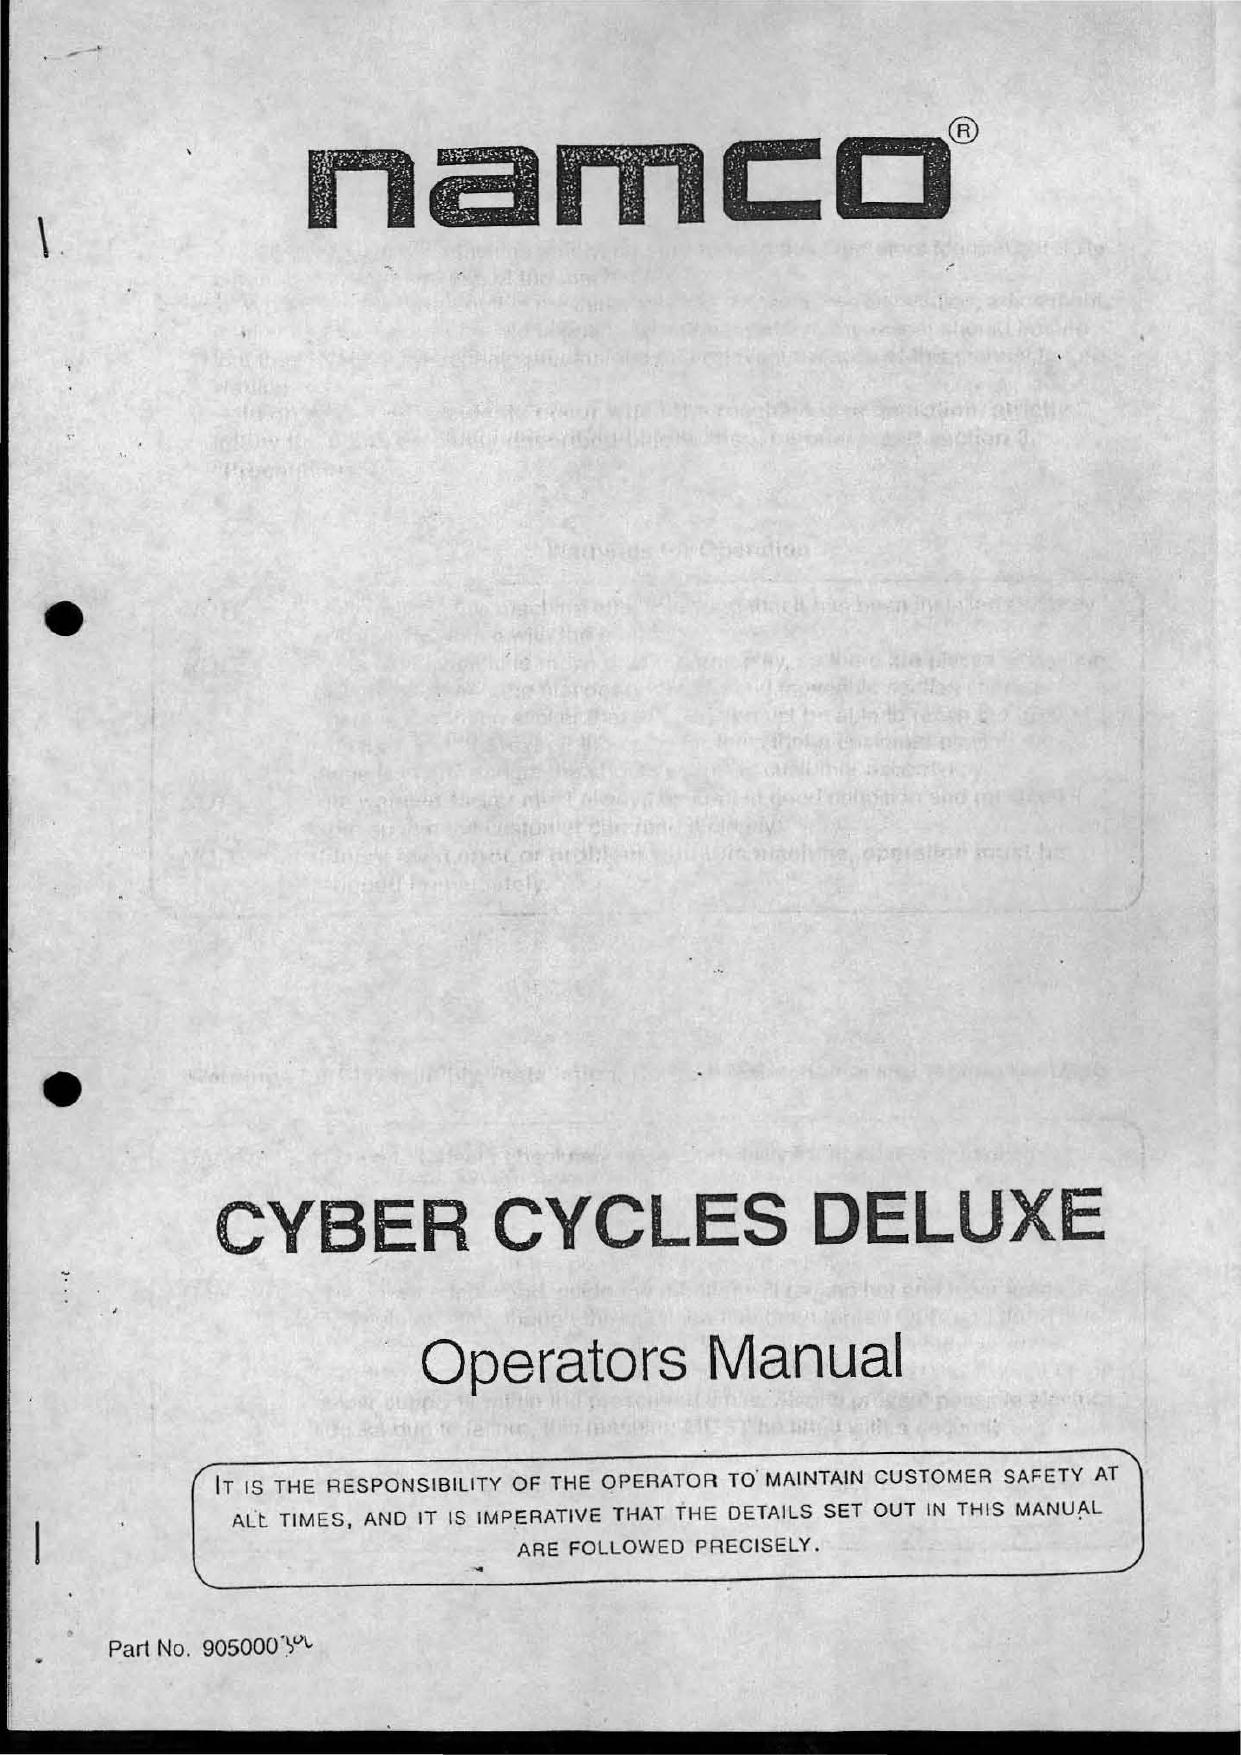 CYBER CYCLES DELUXE